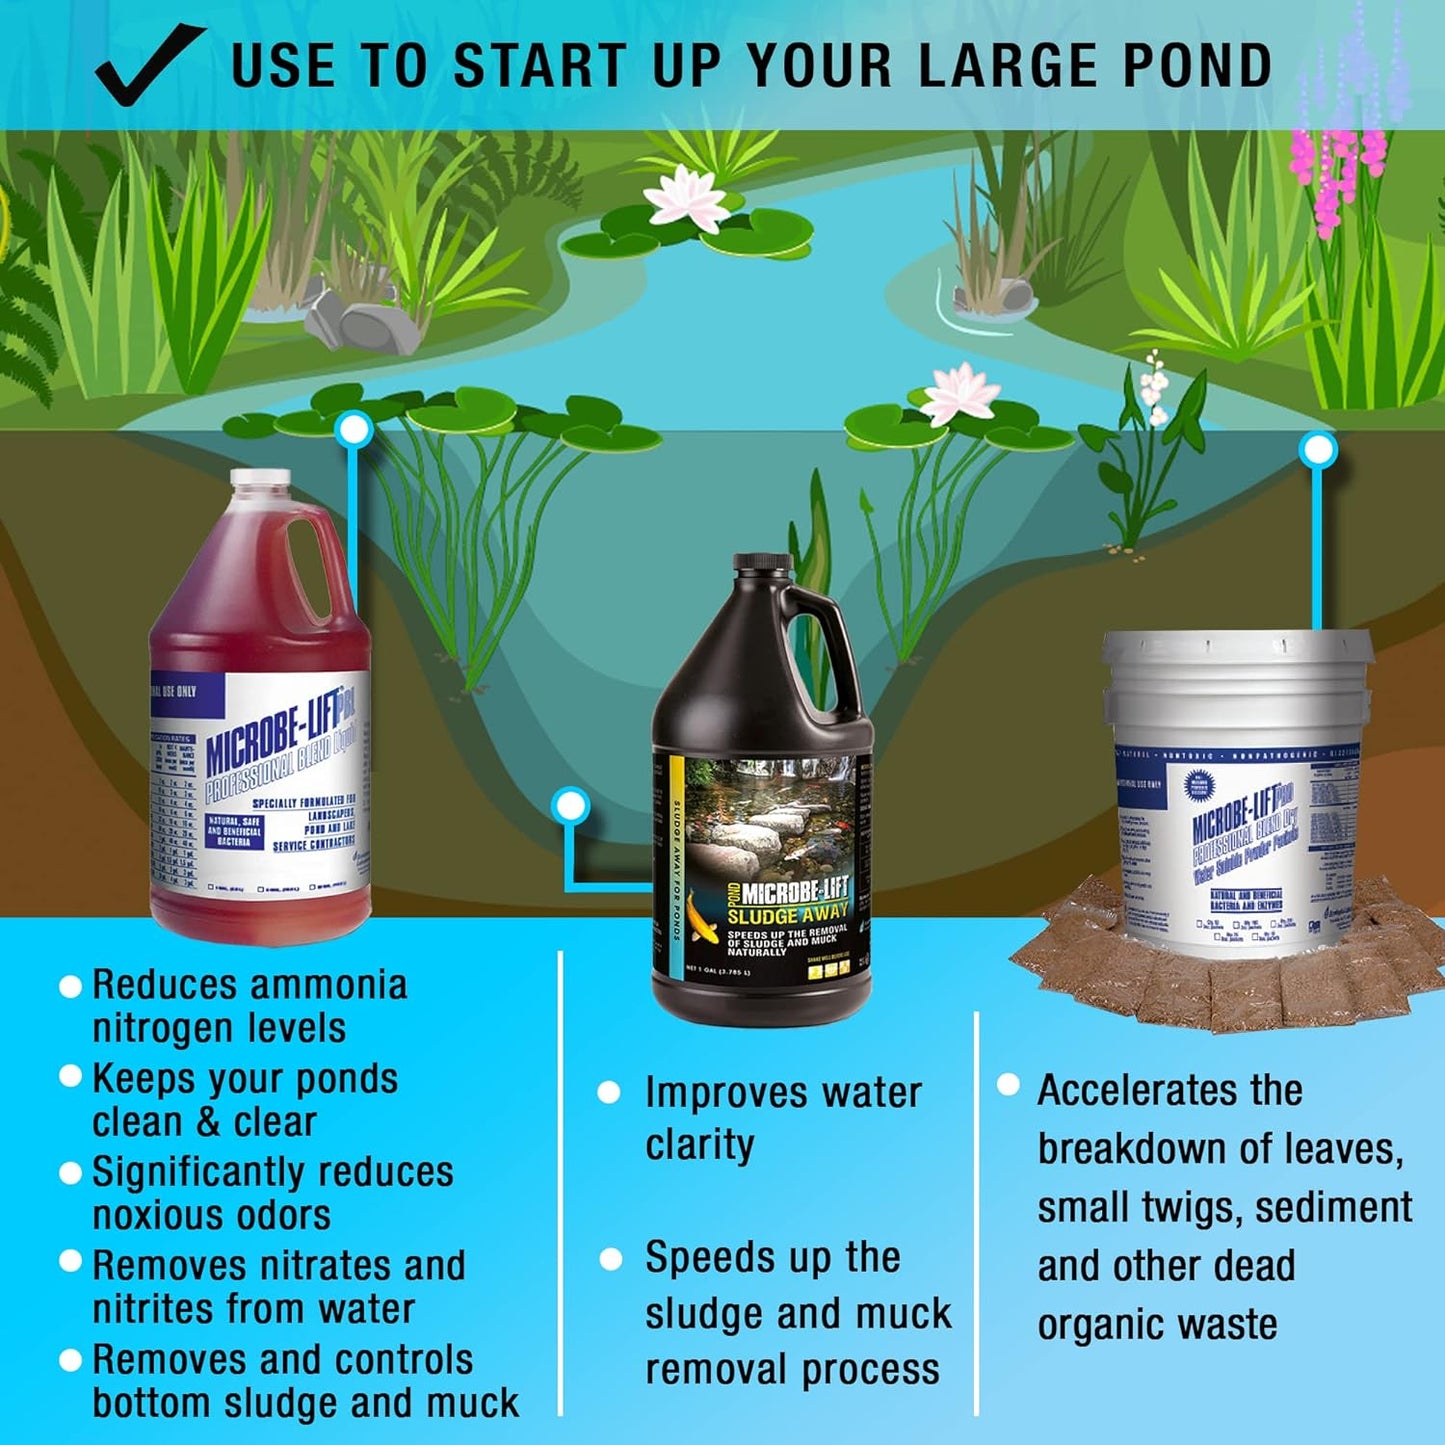 MICROBE-LIFT Clean Pond Kit, Cleans up to 1/4 Acre, Includes Professional Blend Water Clarifier Treatment, and Sludge-Away Sludge Remover to Maintain a Healthy Ecosyste